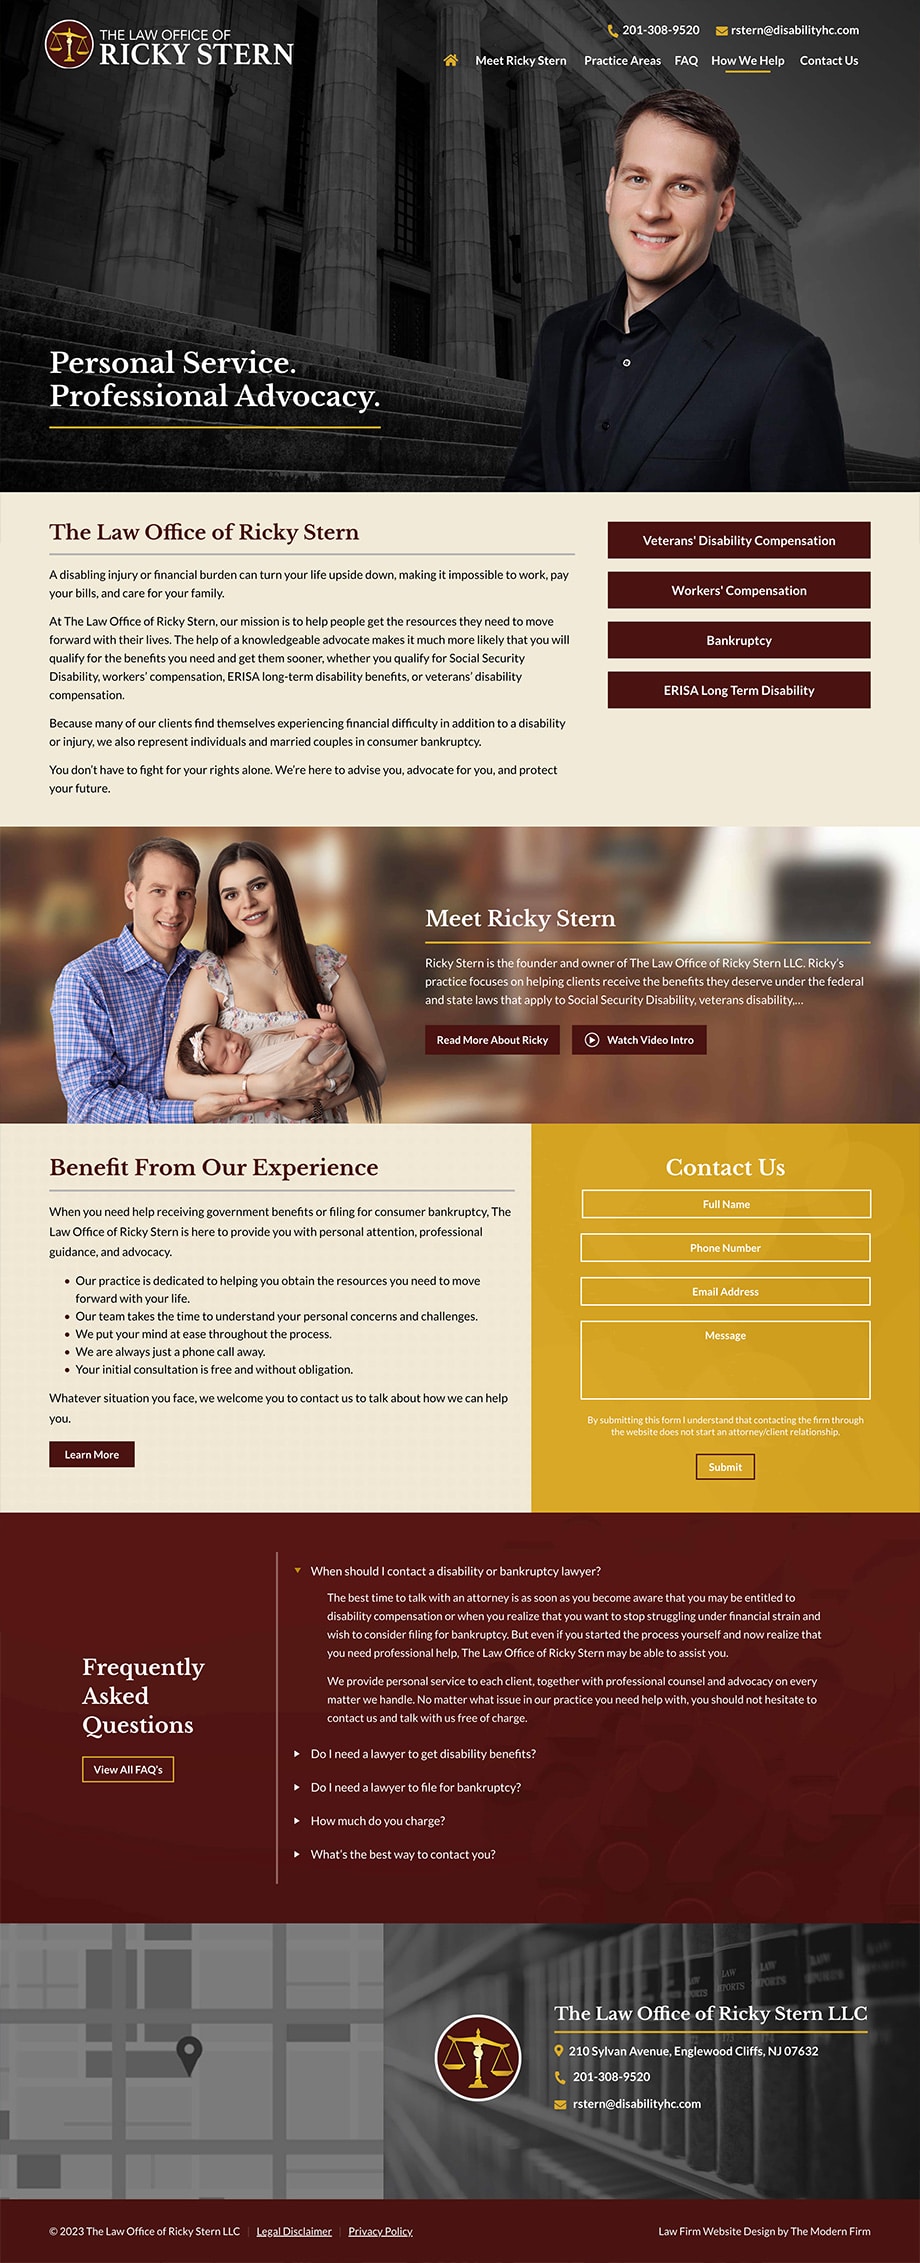 Law Firm Website Design for The Law Office of Ricky Stern LLC 